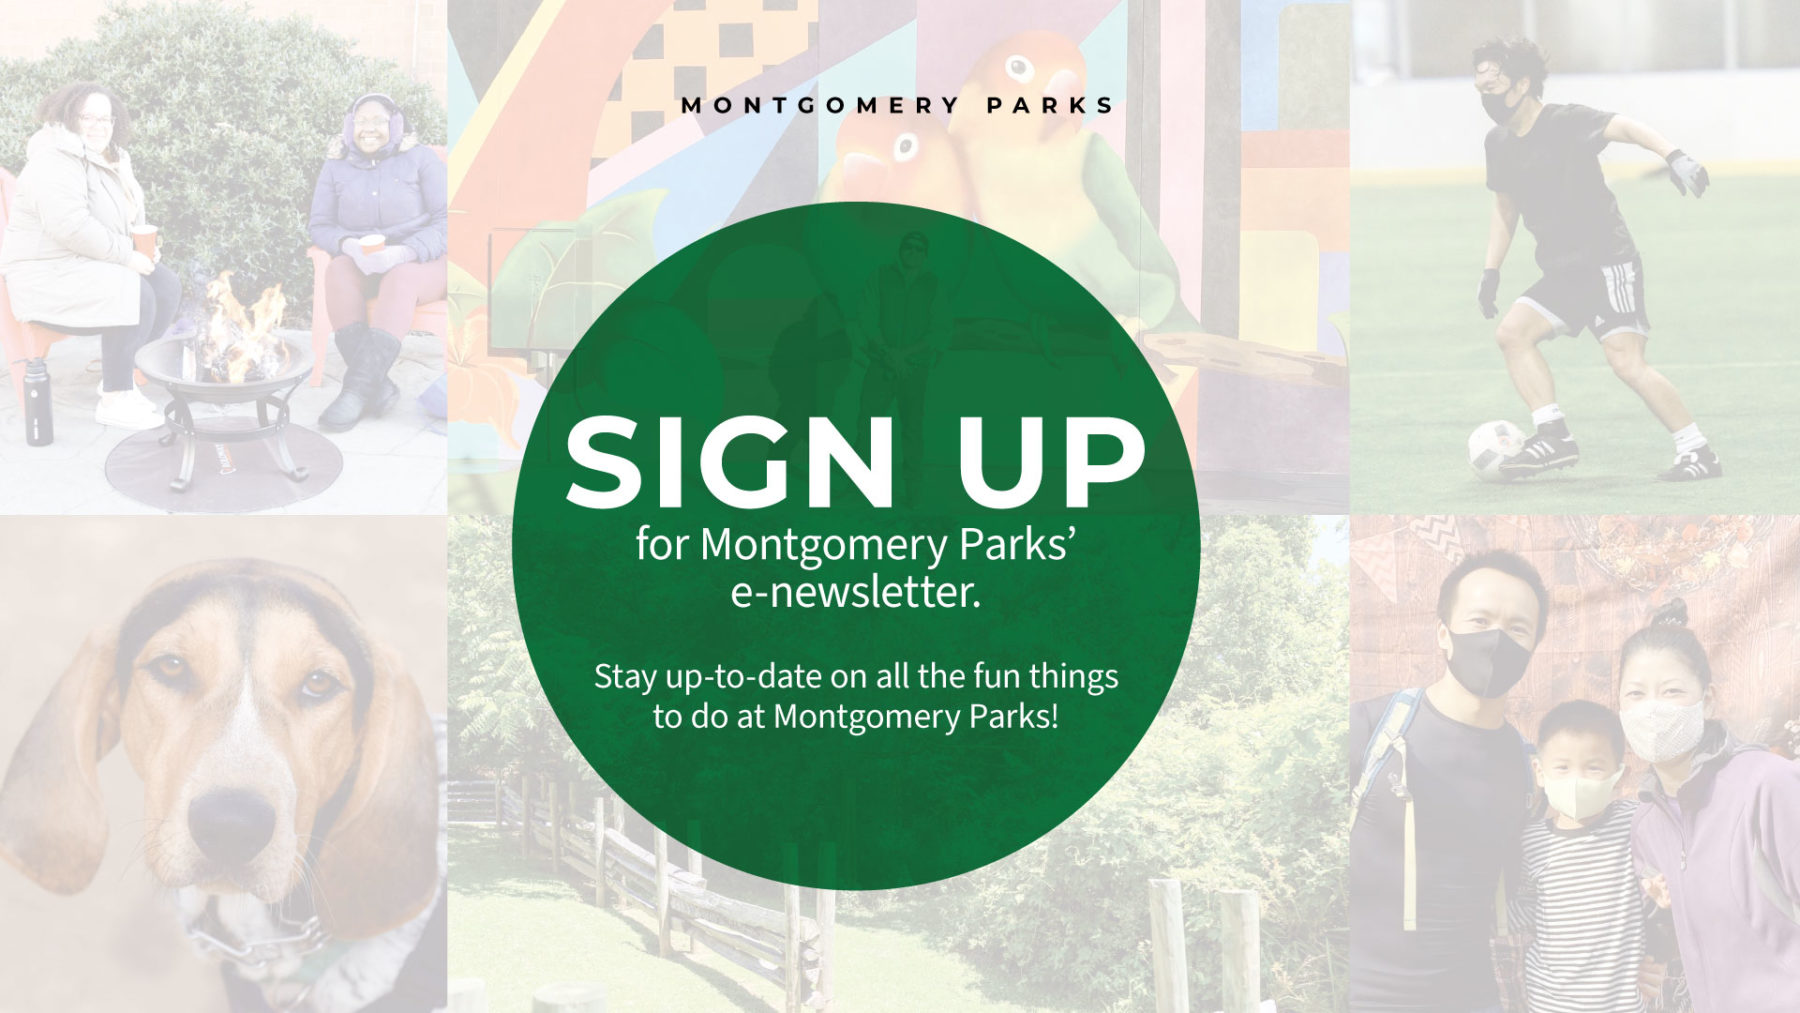 Sign up for Montgomery Parks Newsletters